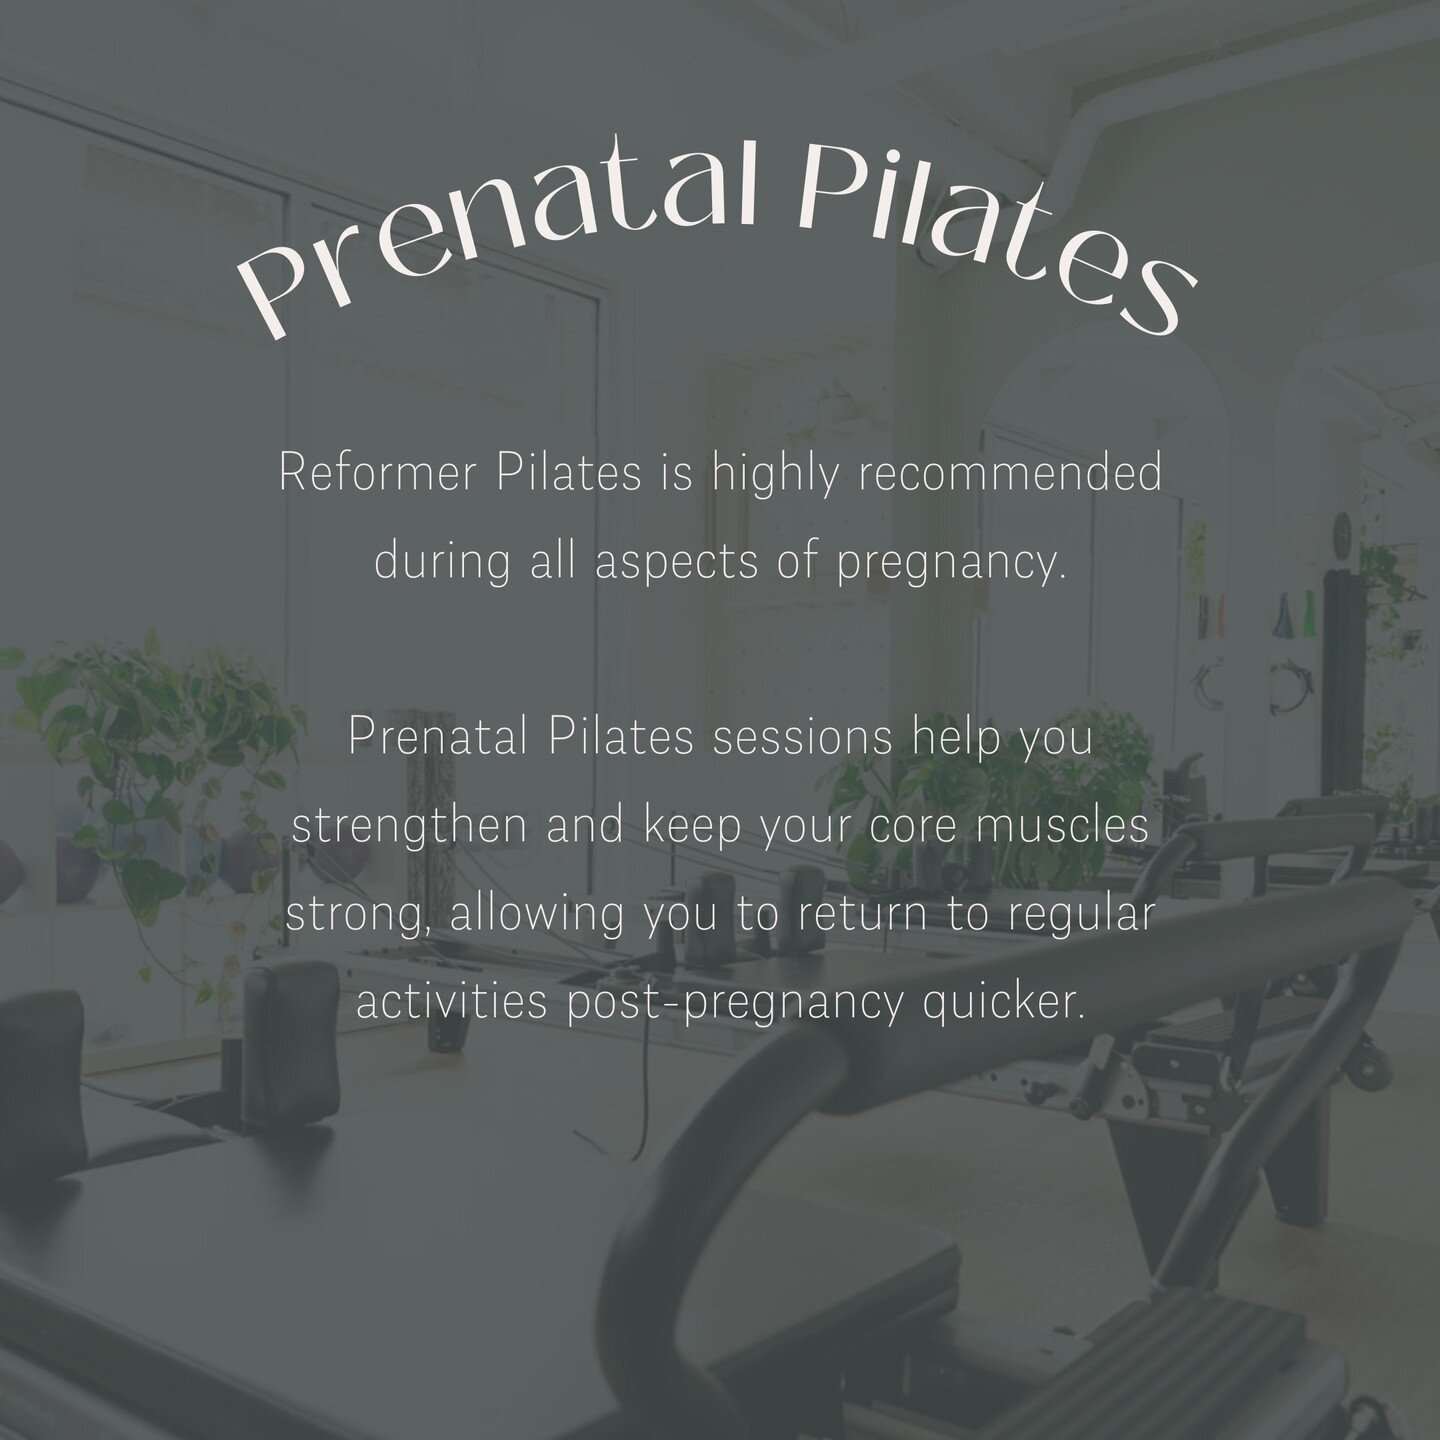 Can I do Reformer Pilates in my Third Trimester?⁠ Reformer Pilates activates the transverse abdominals muscles that wrap around your torso like a corset while lifting and strengthening the pelvic floor muscles is which is great to keep strong for lab